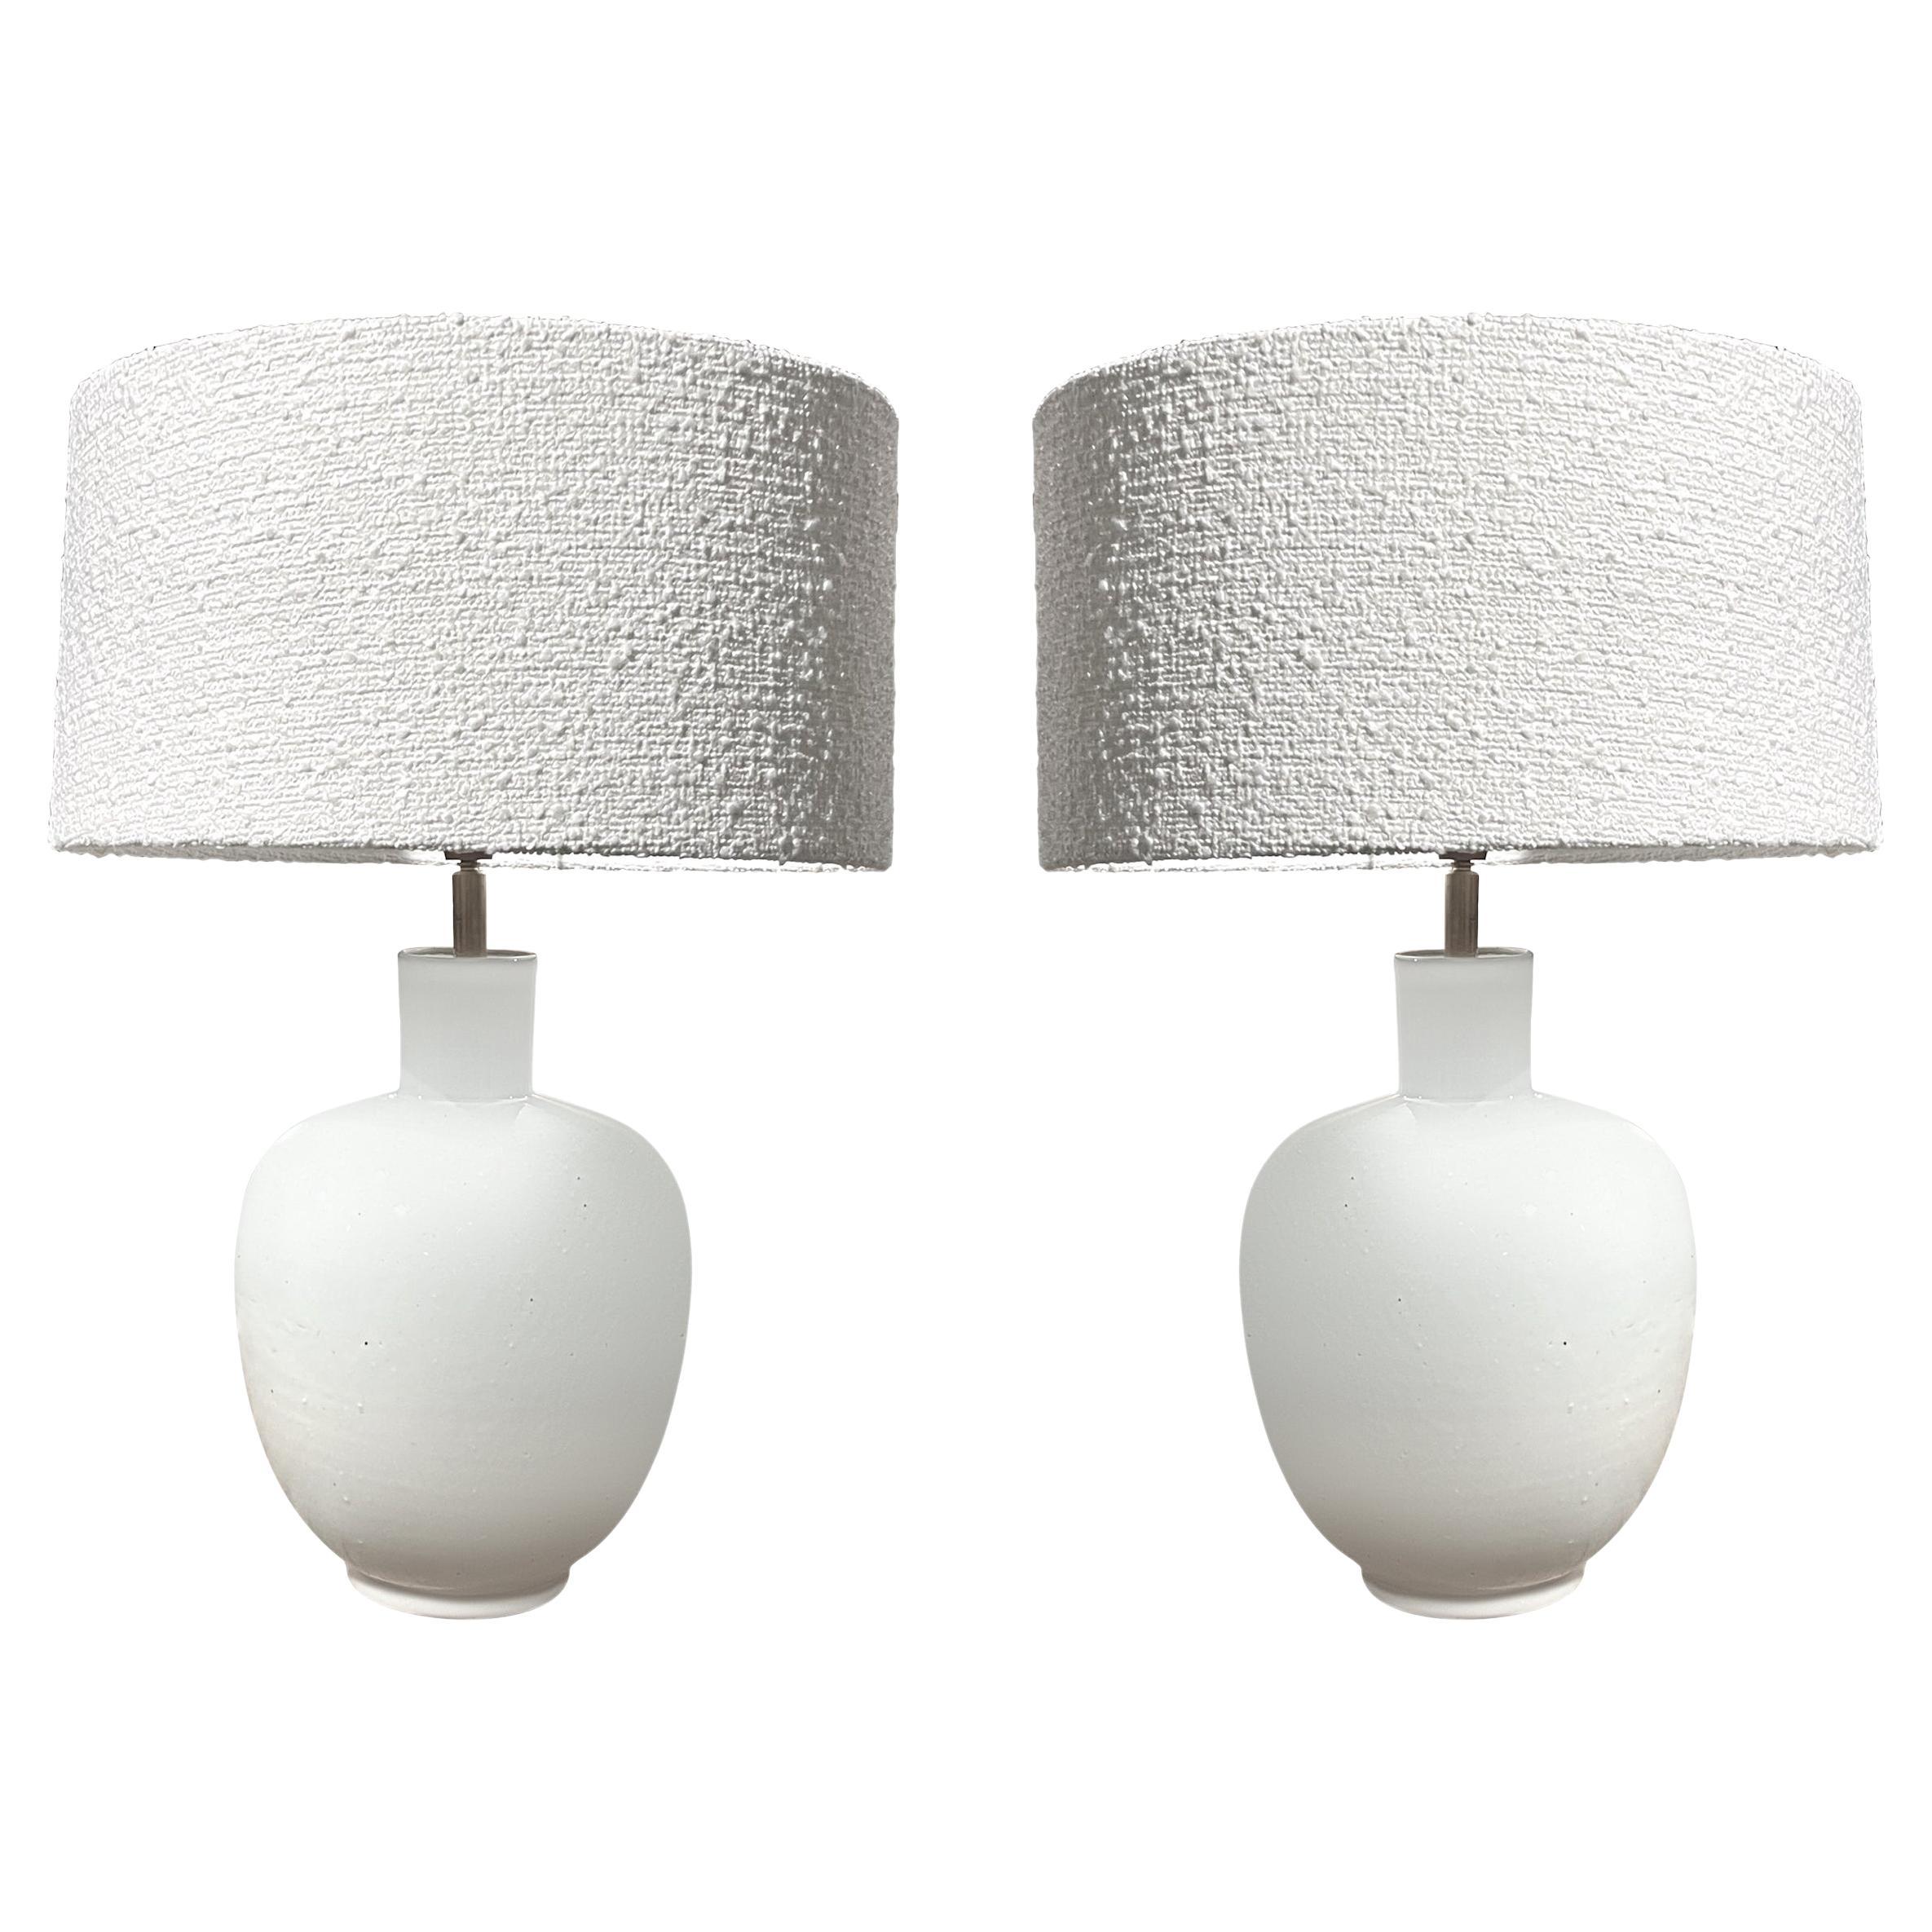 White Round Shaped Base Pair Of Lamps, China, Contemporary